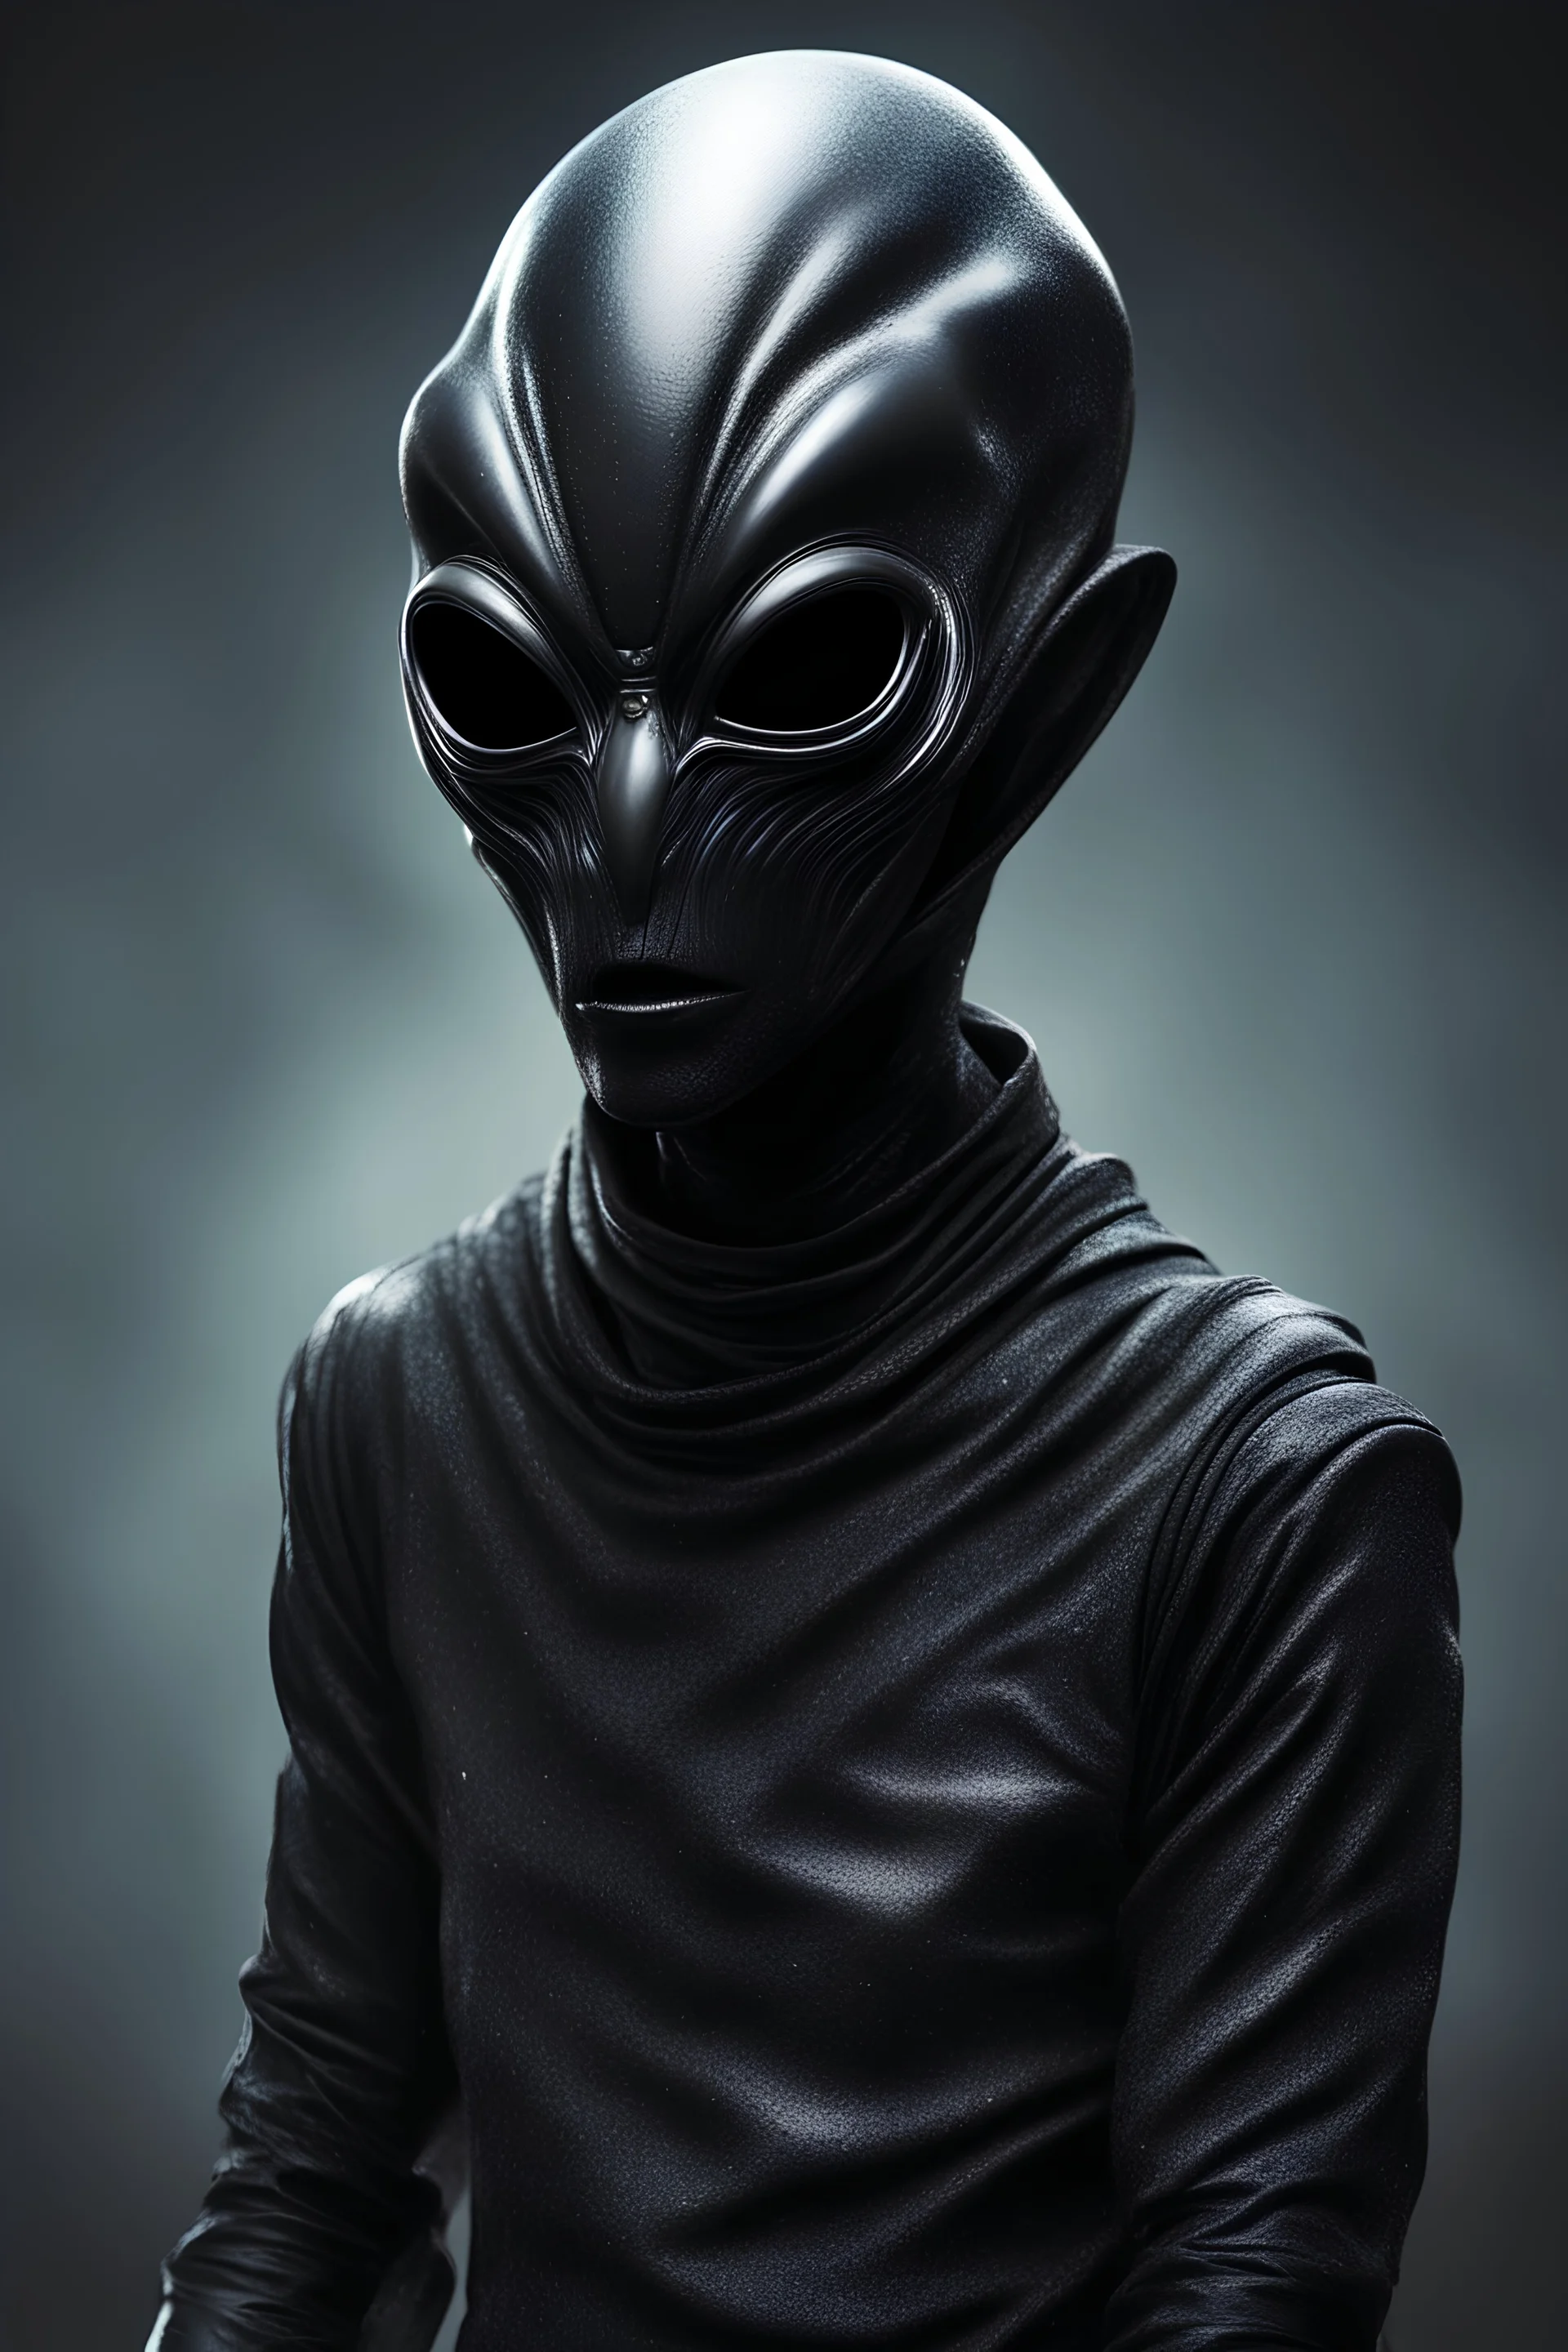 Space alien with black mask